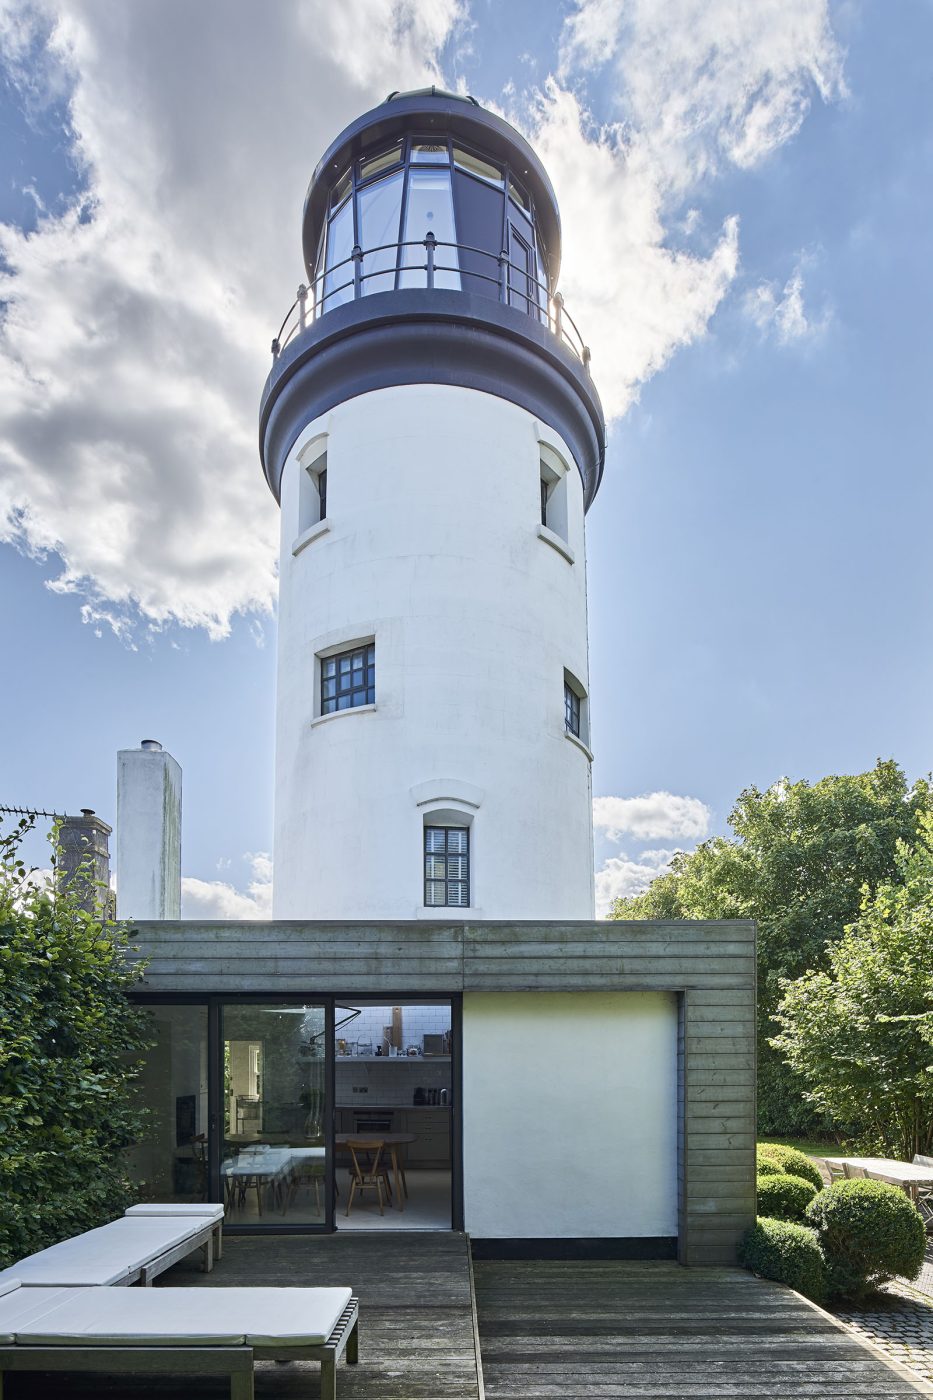 Exterior of Sally Mackereth's lighthouse home in England